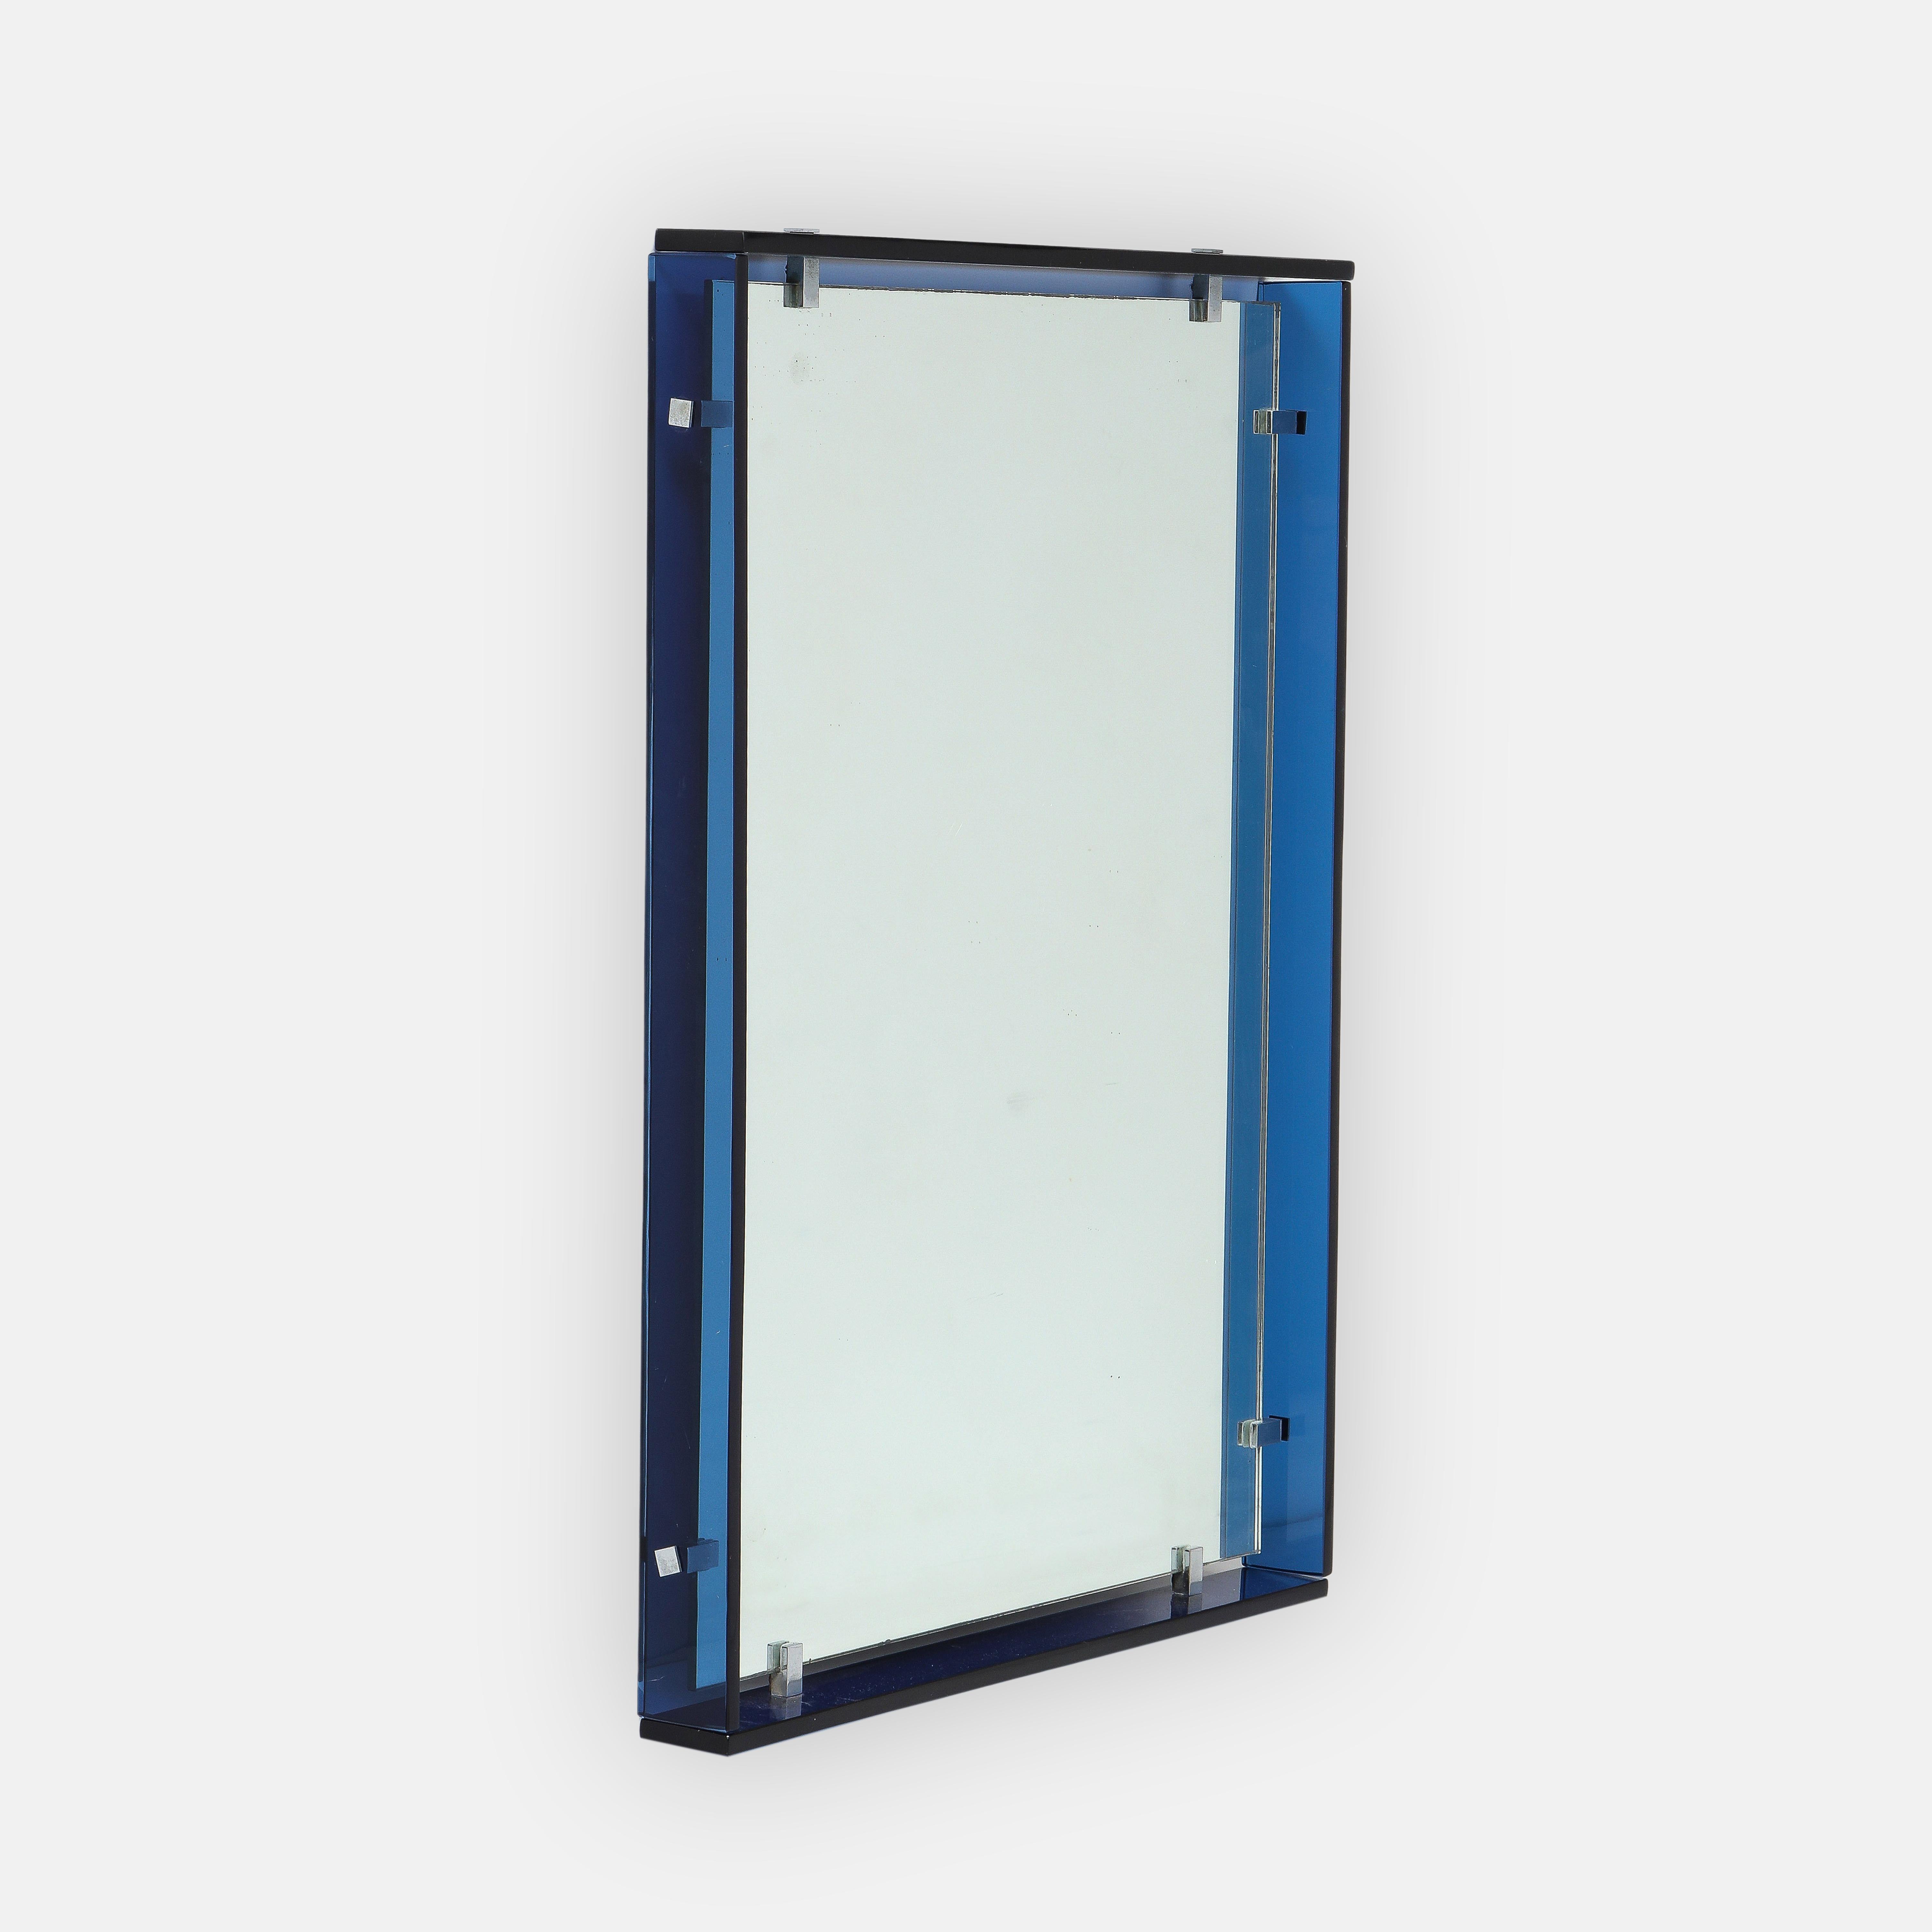 Max Ingrand for Fontana Arte modernist rectangular mirror model 2014 consisting of thick cobalt blue colored strips of crystal glass surrounding original mirrored glass with nickel-plated brass clip supports, Italy, 1960s. This chic avant-garde